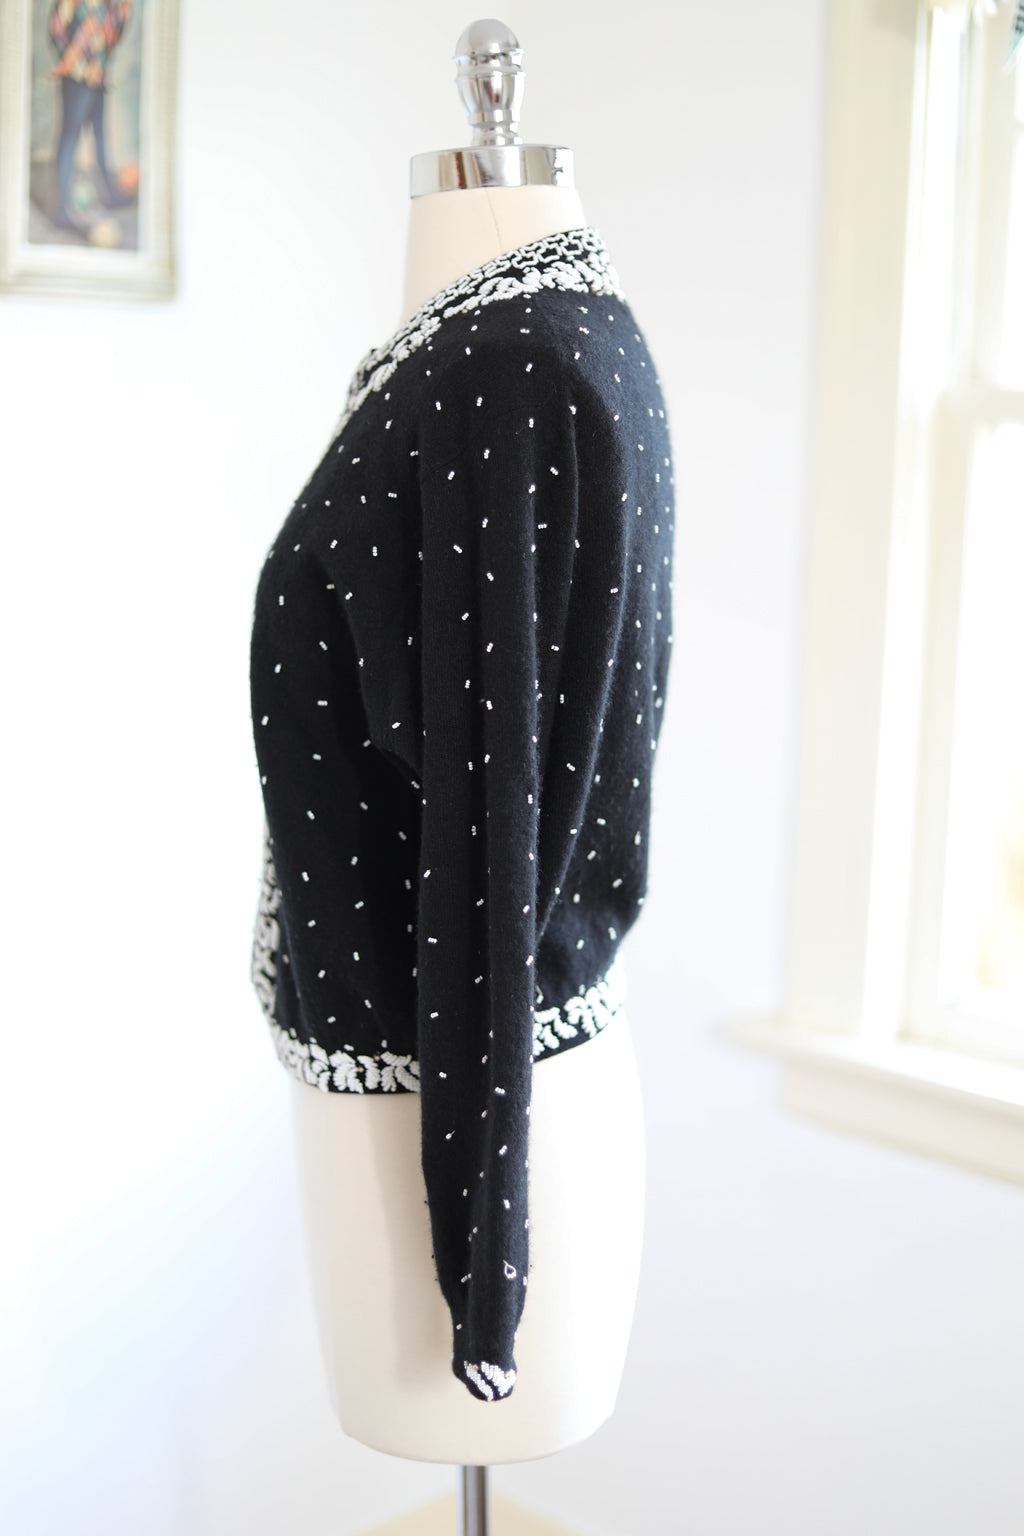 Vintage 1950s to 1960s Beaded Sweater - Gorgeous Black White Lambswool or Cashmere Cardigan w Metal Studs Size M to L